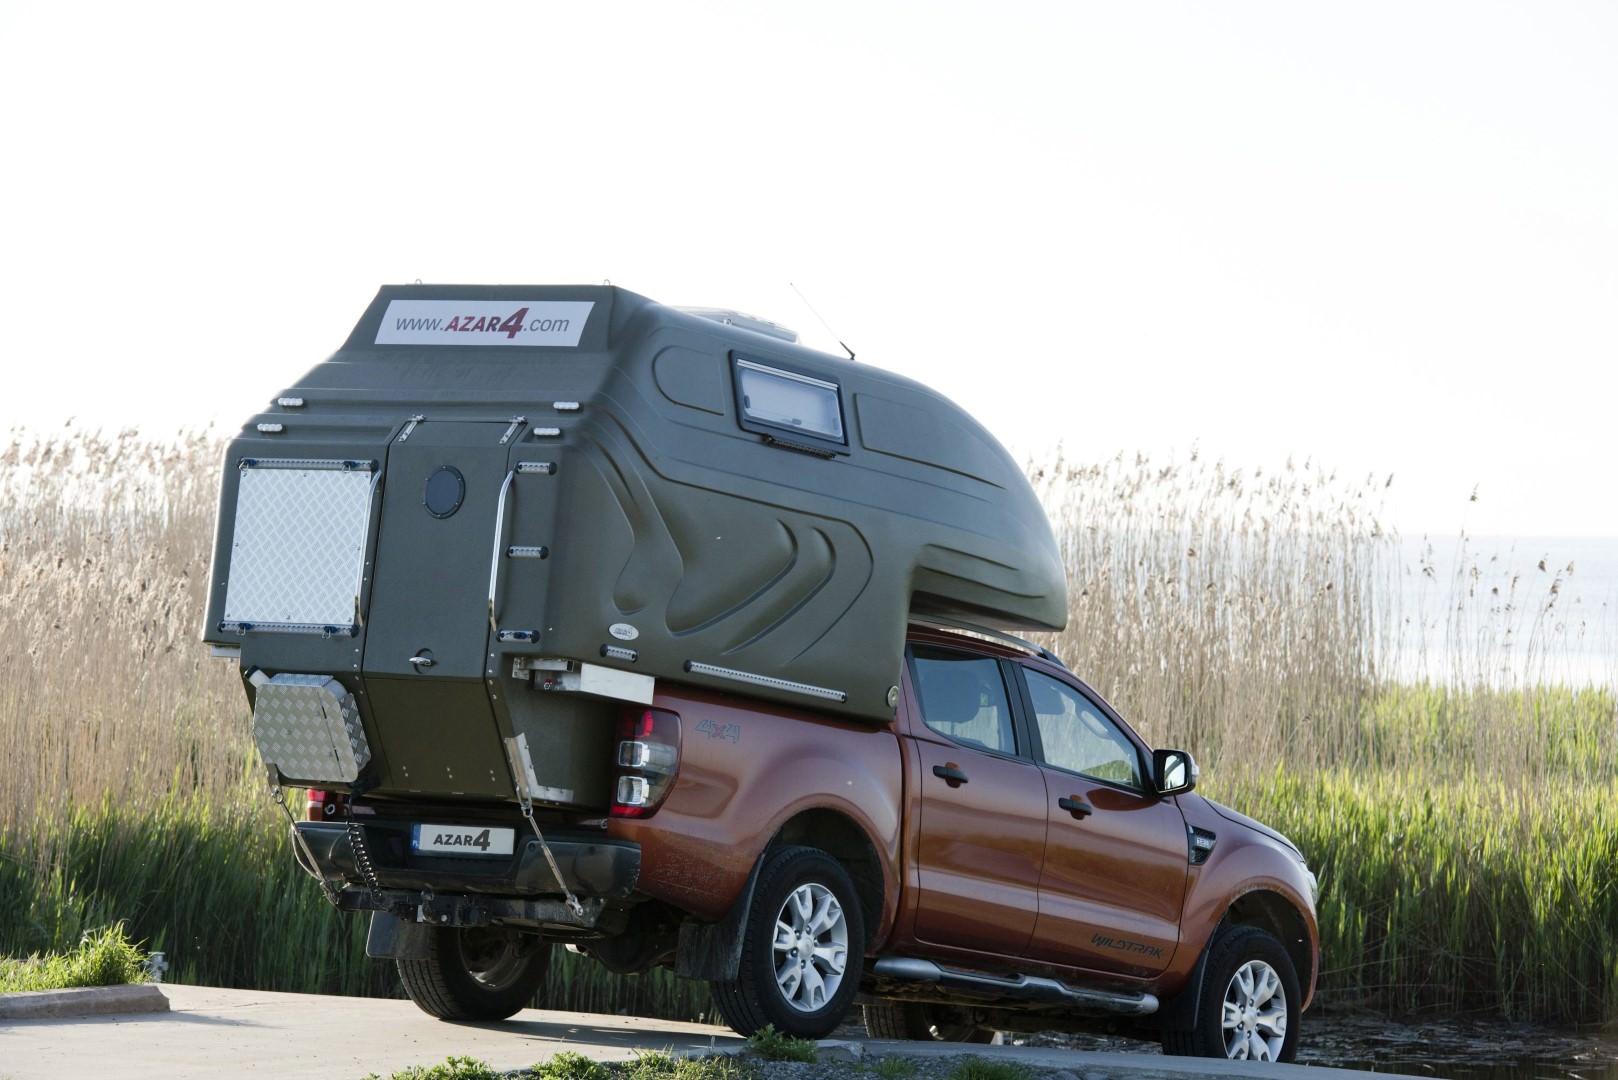 Advantages of the AZAR4® capsule for a pickup truck